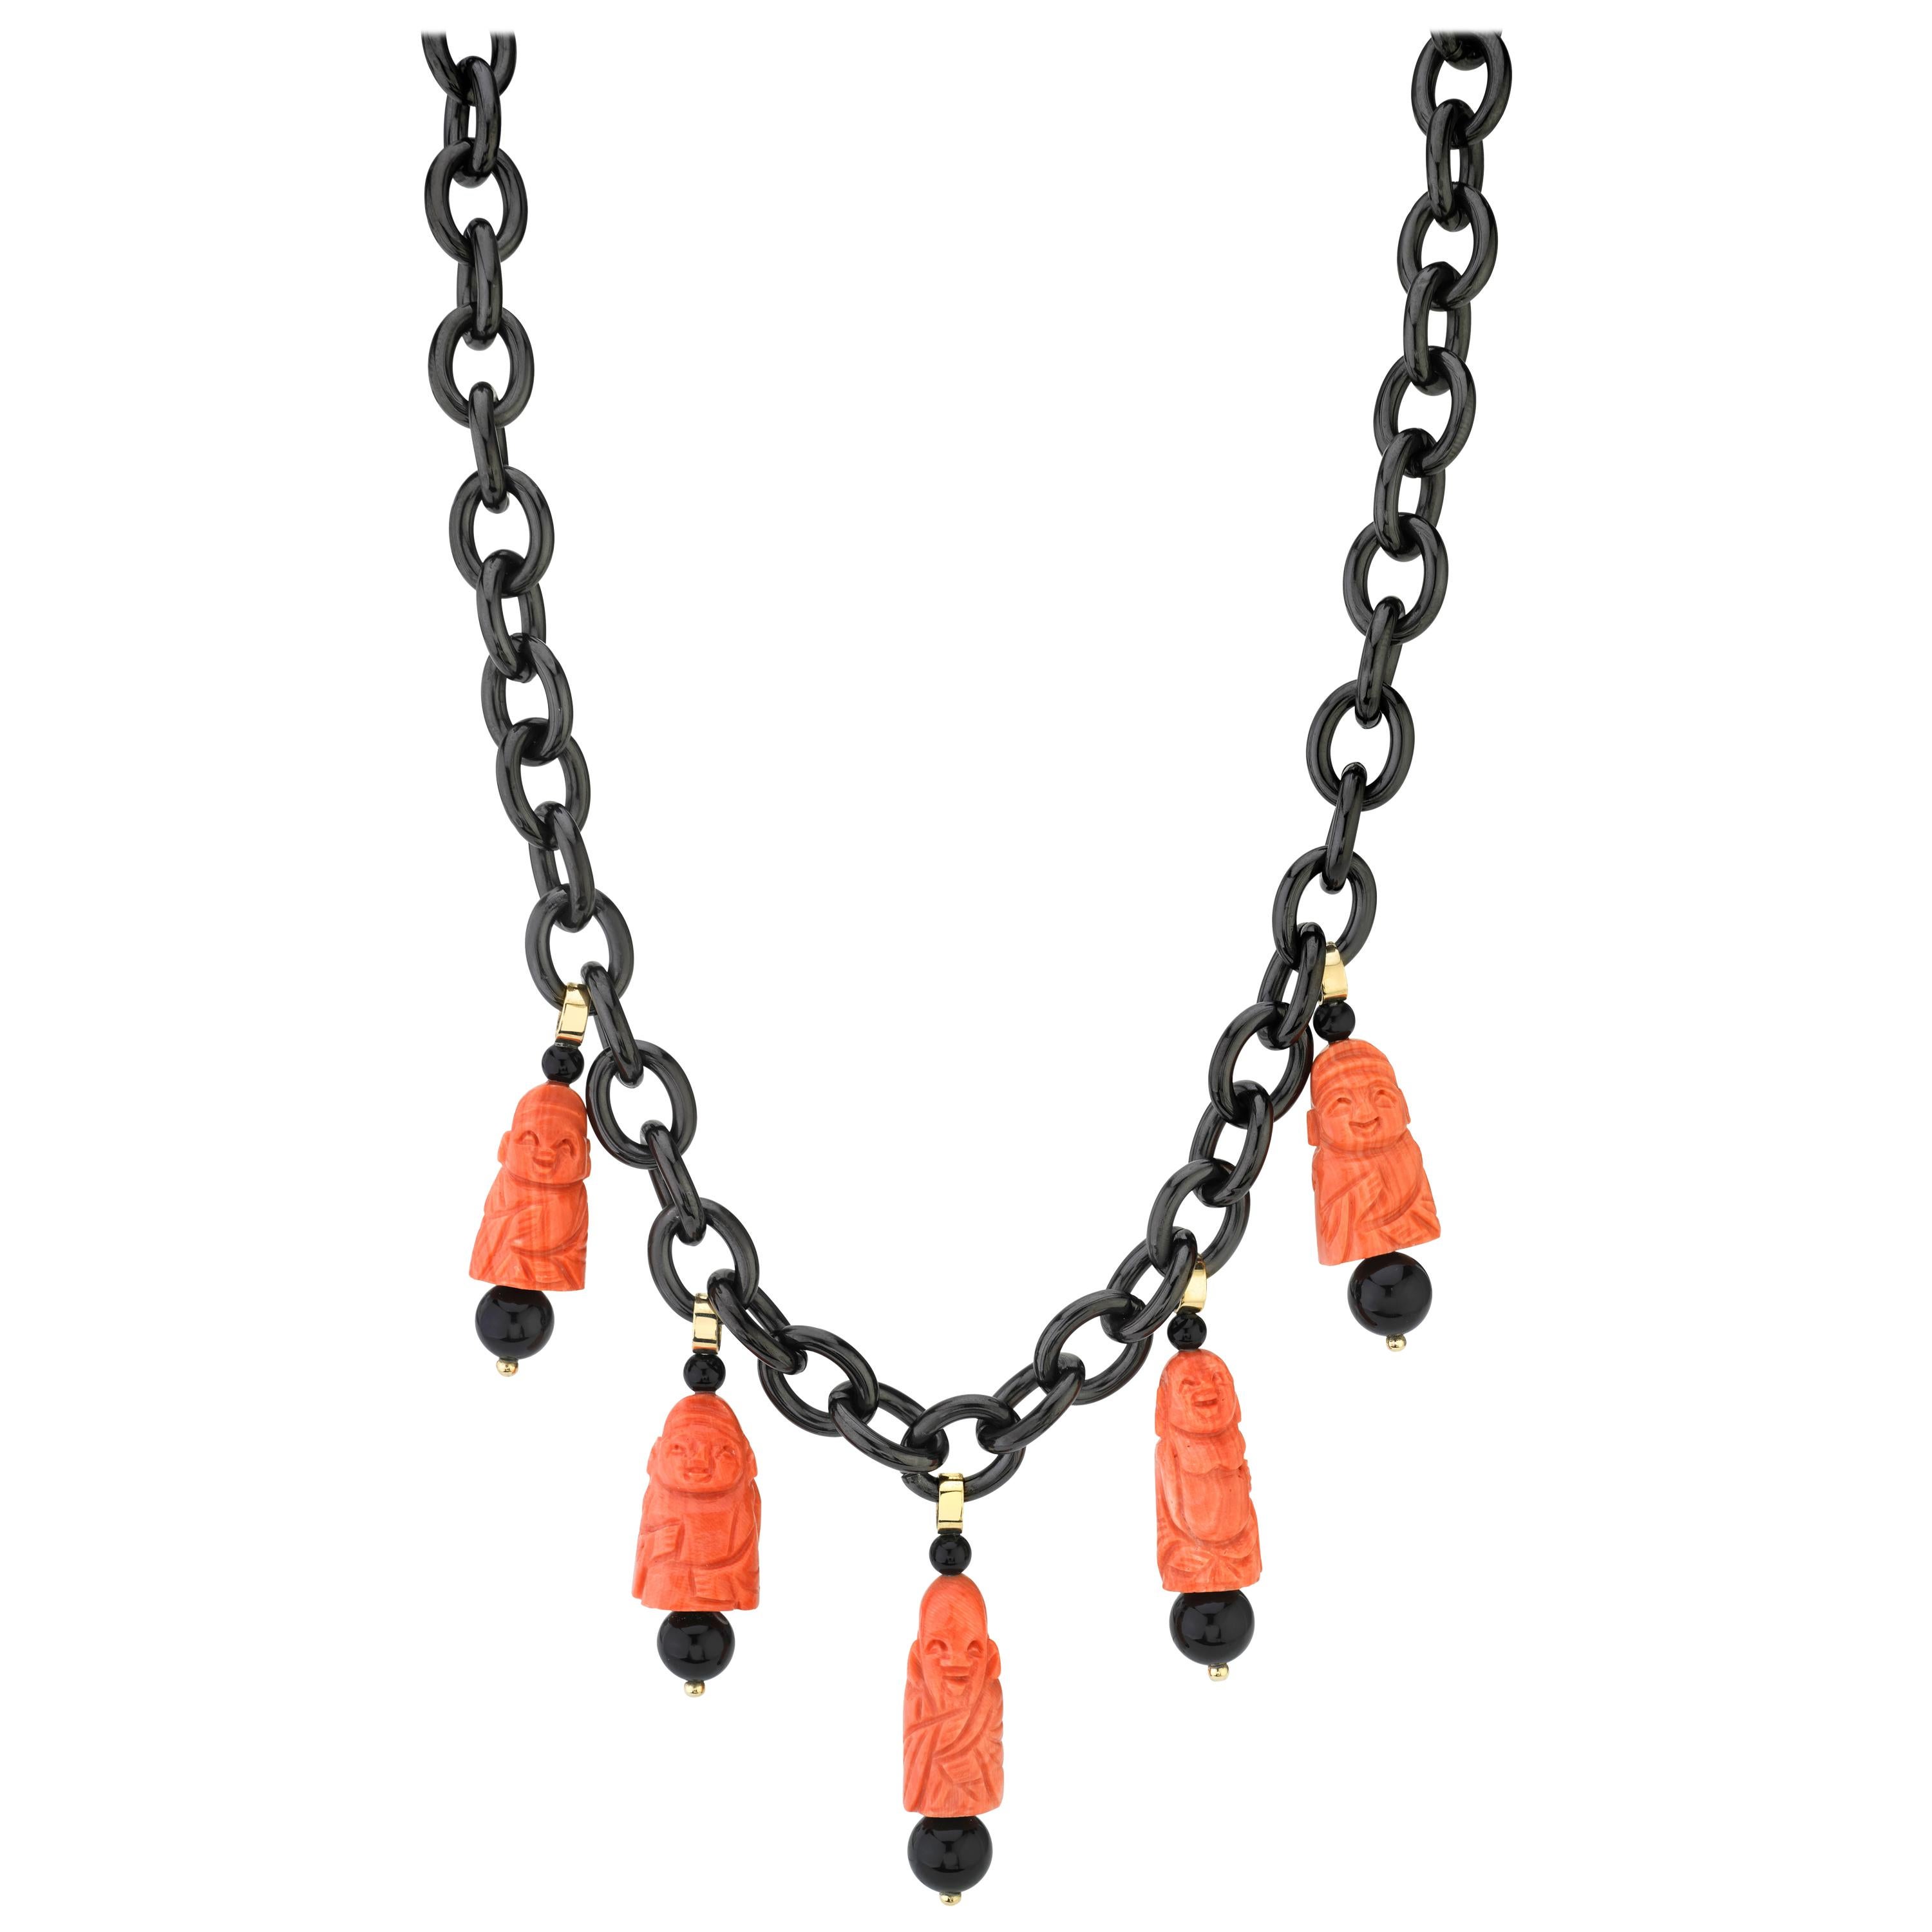 Hand Carved Italian Coral, Onyx, Yellow Gold Charm Necklace with Blackened Steel